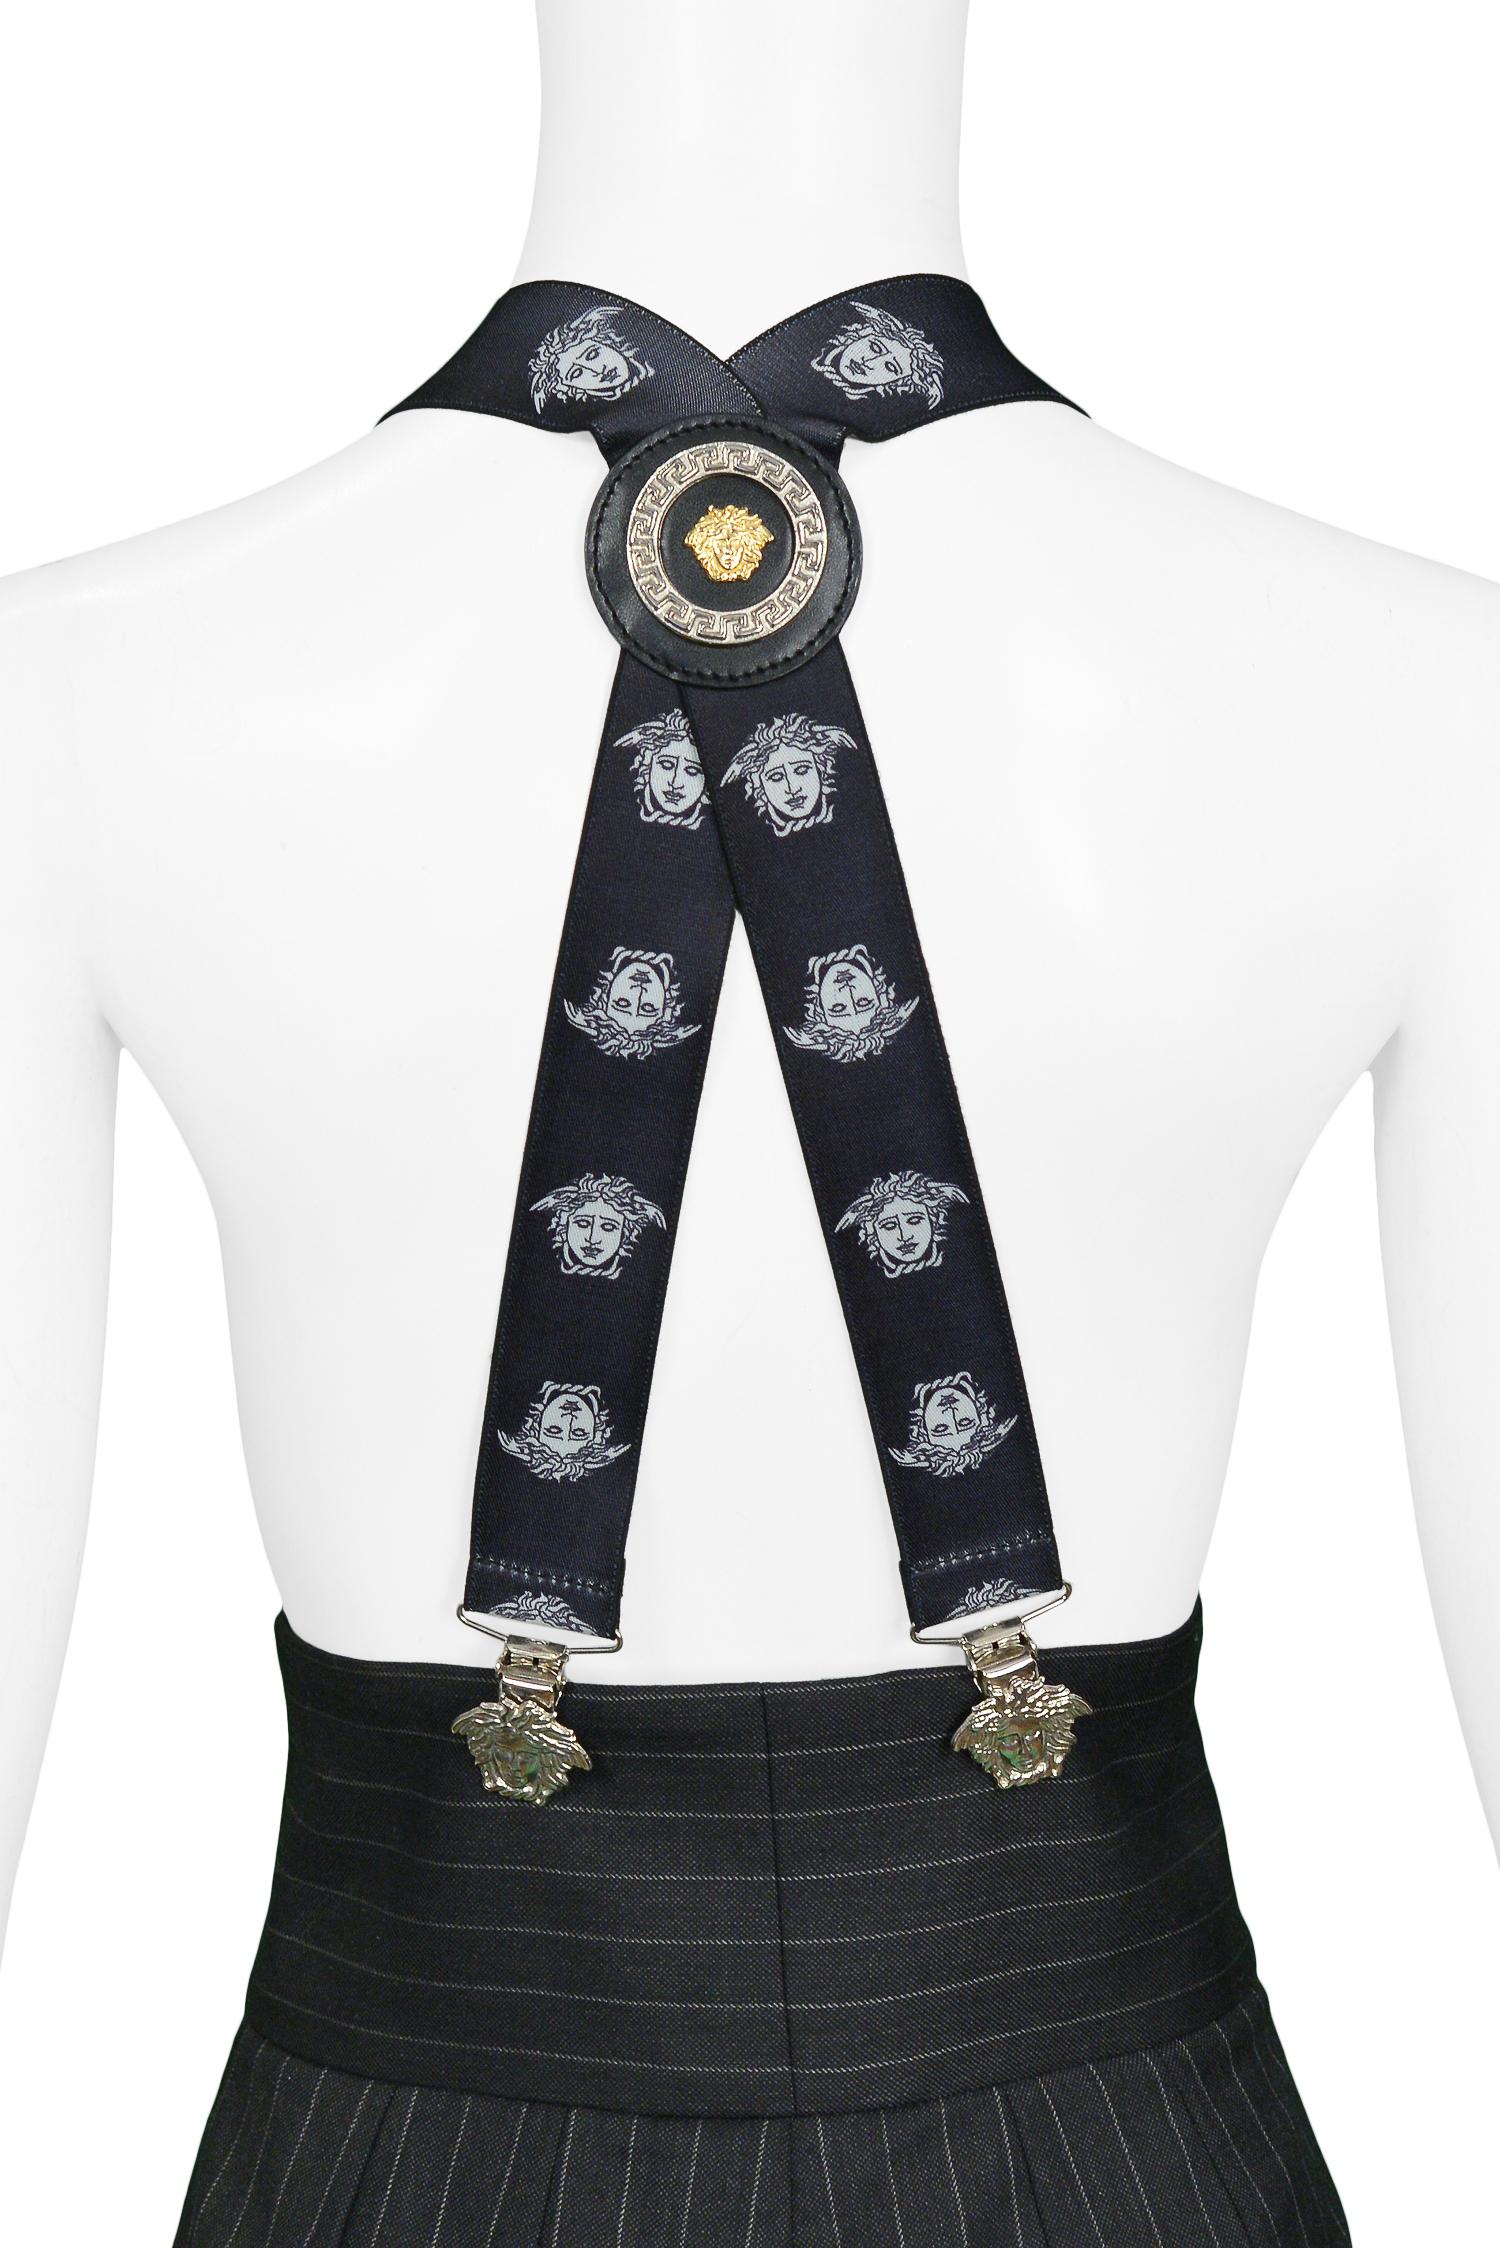 Vintage Gianni Versace black and white suspenders with printed Medusa heads, silver tone Medusa head clips, and medallion at back. Circa 1990s.

Excellent Condition.

Size: ONE SIZE